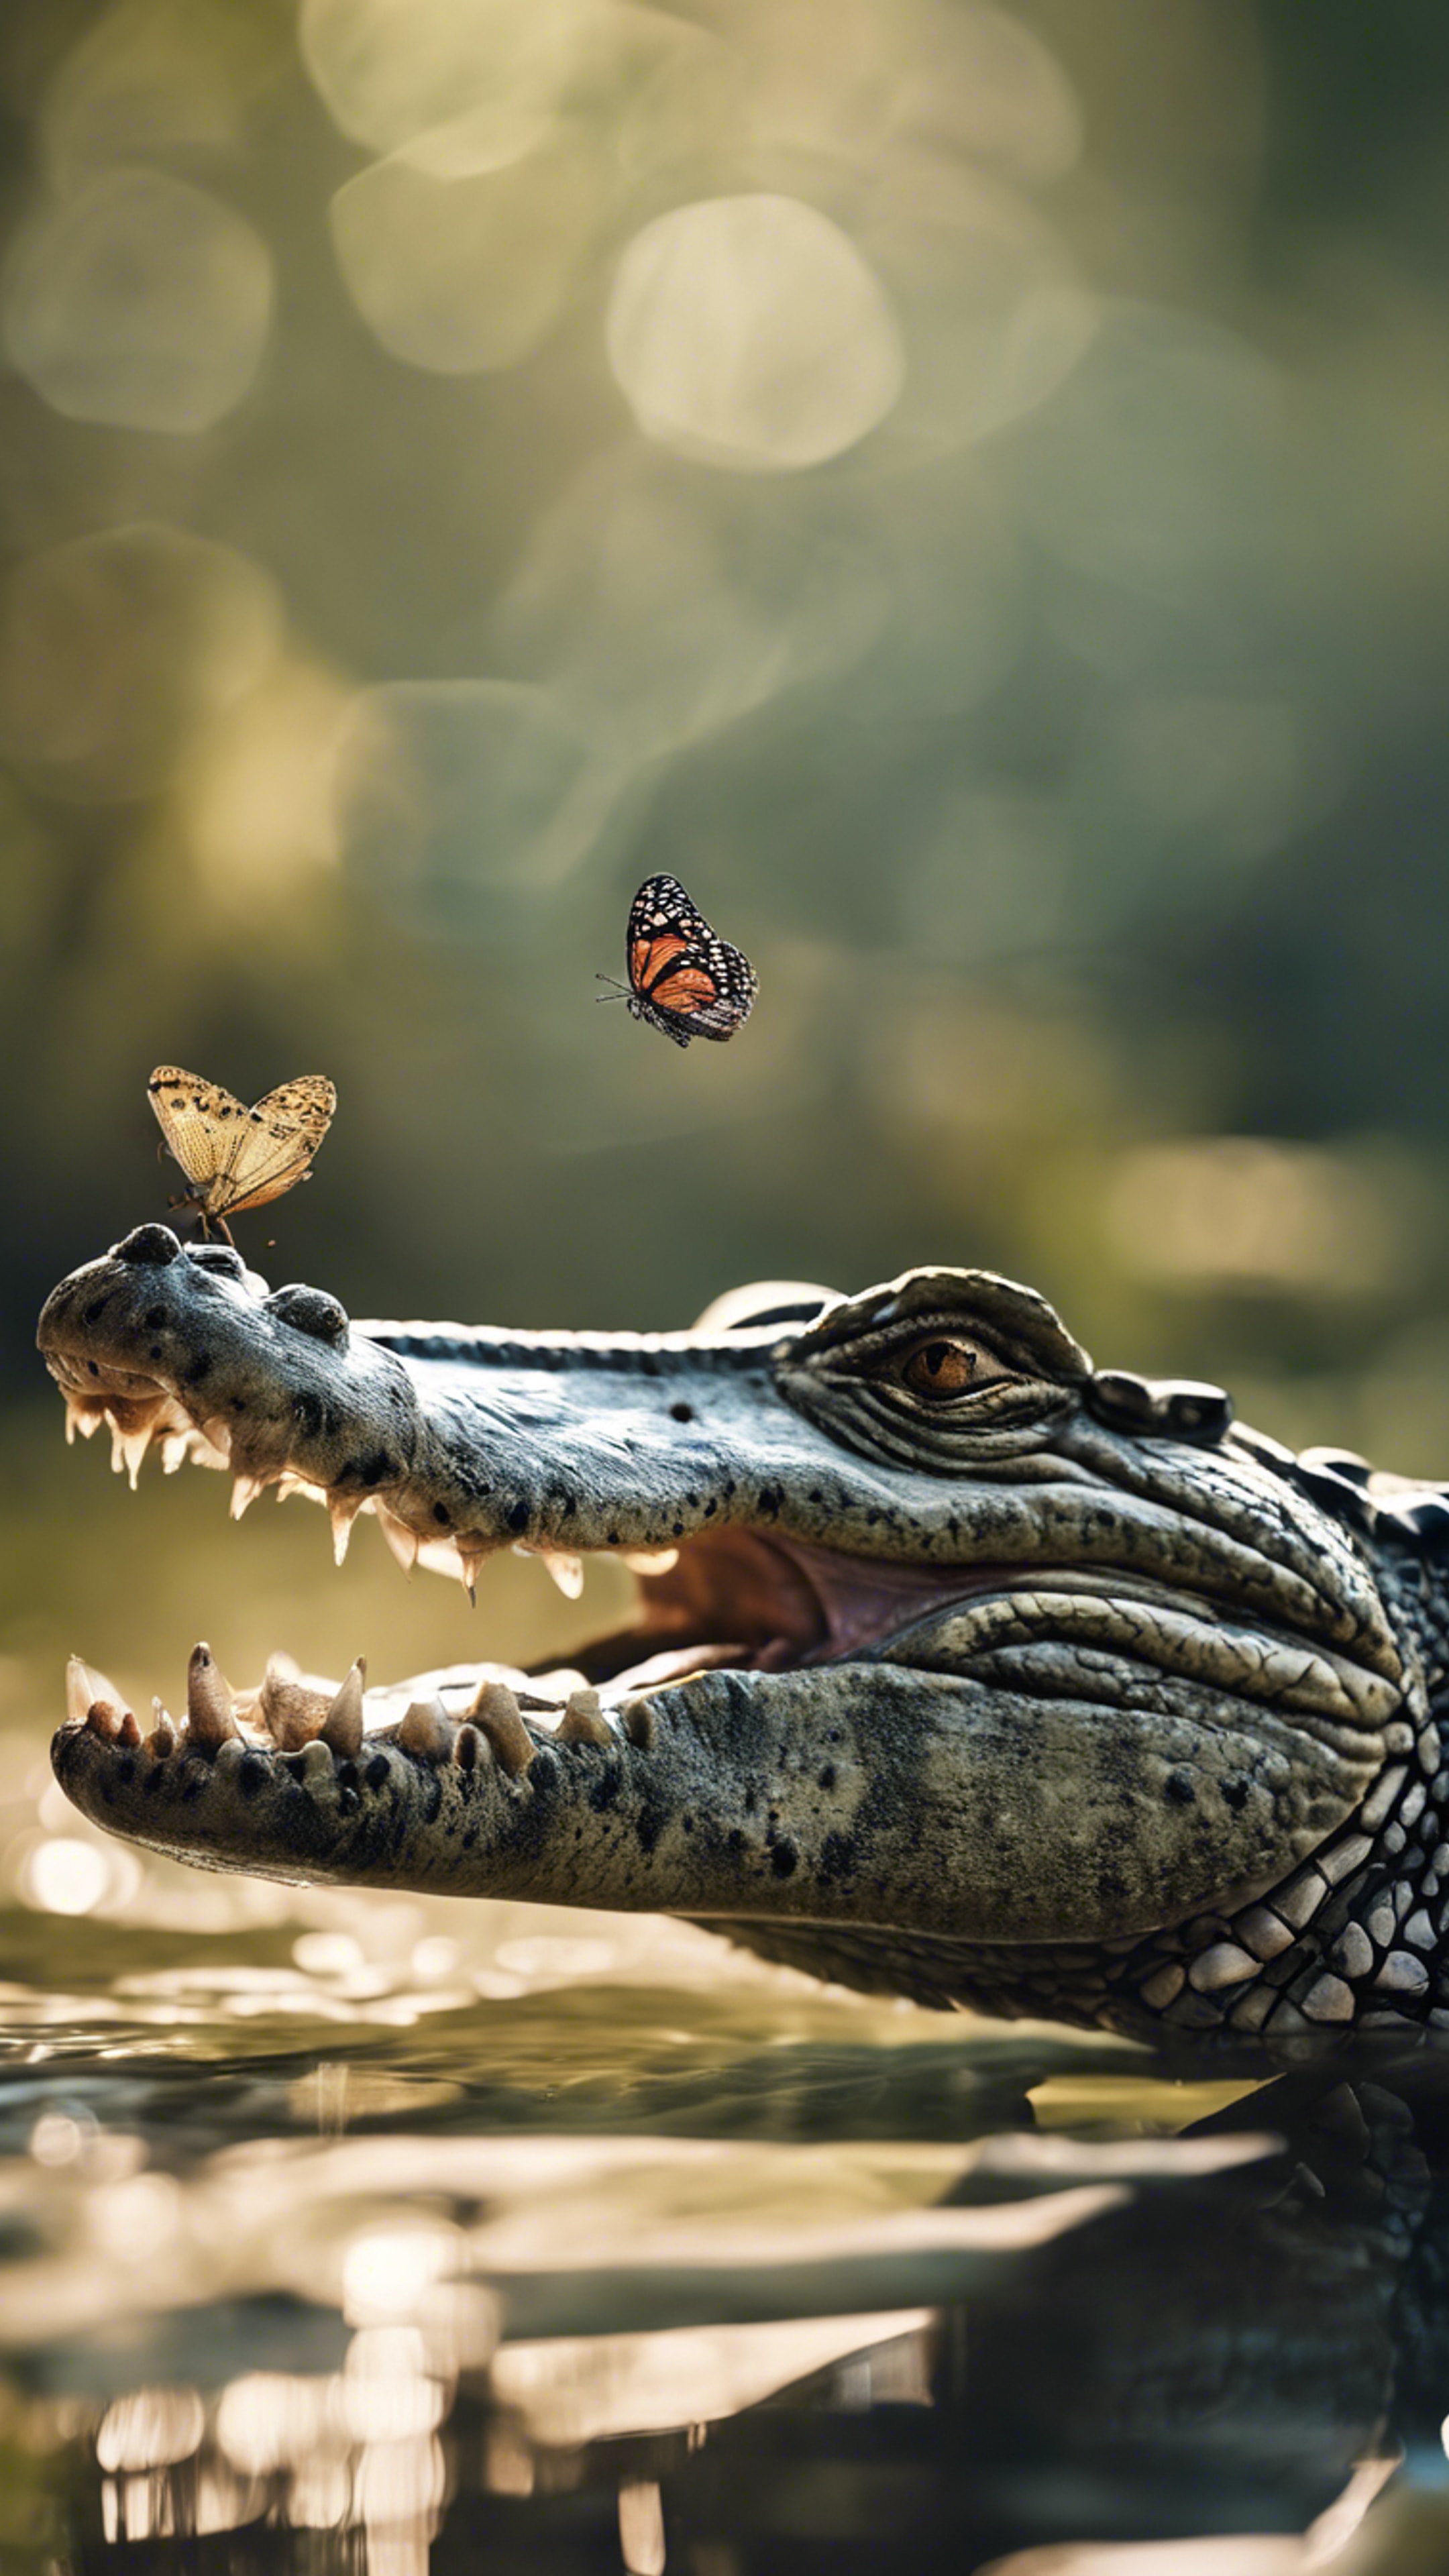 Crocodile resting with a butterfly perched on its snout in a surreal juxtaposition.壁紙[8346a78328a54efca4ea]